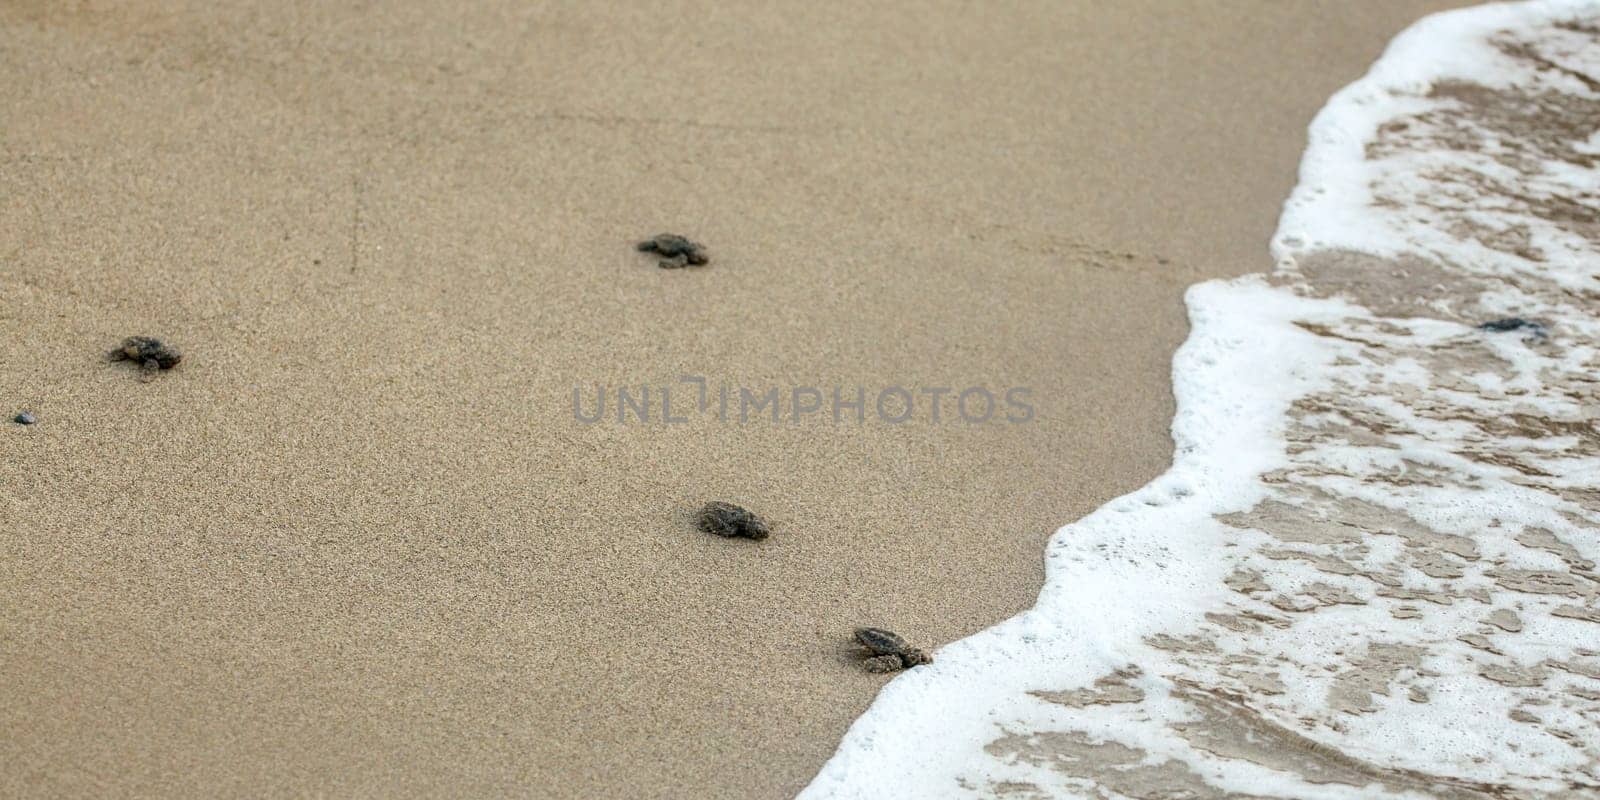 Baby turtles, just hatched from eggs, walking on sand trying to get into sea by Ivanko